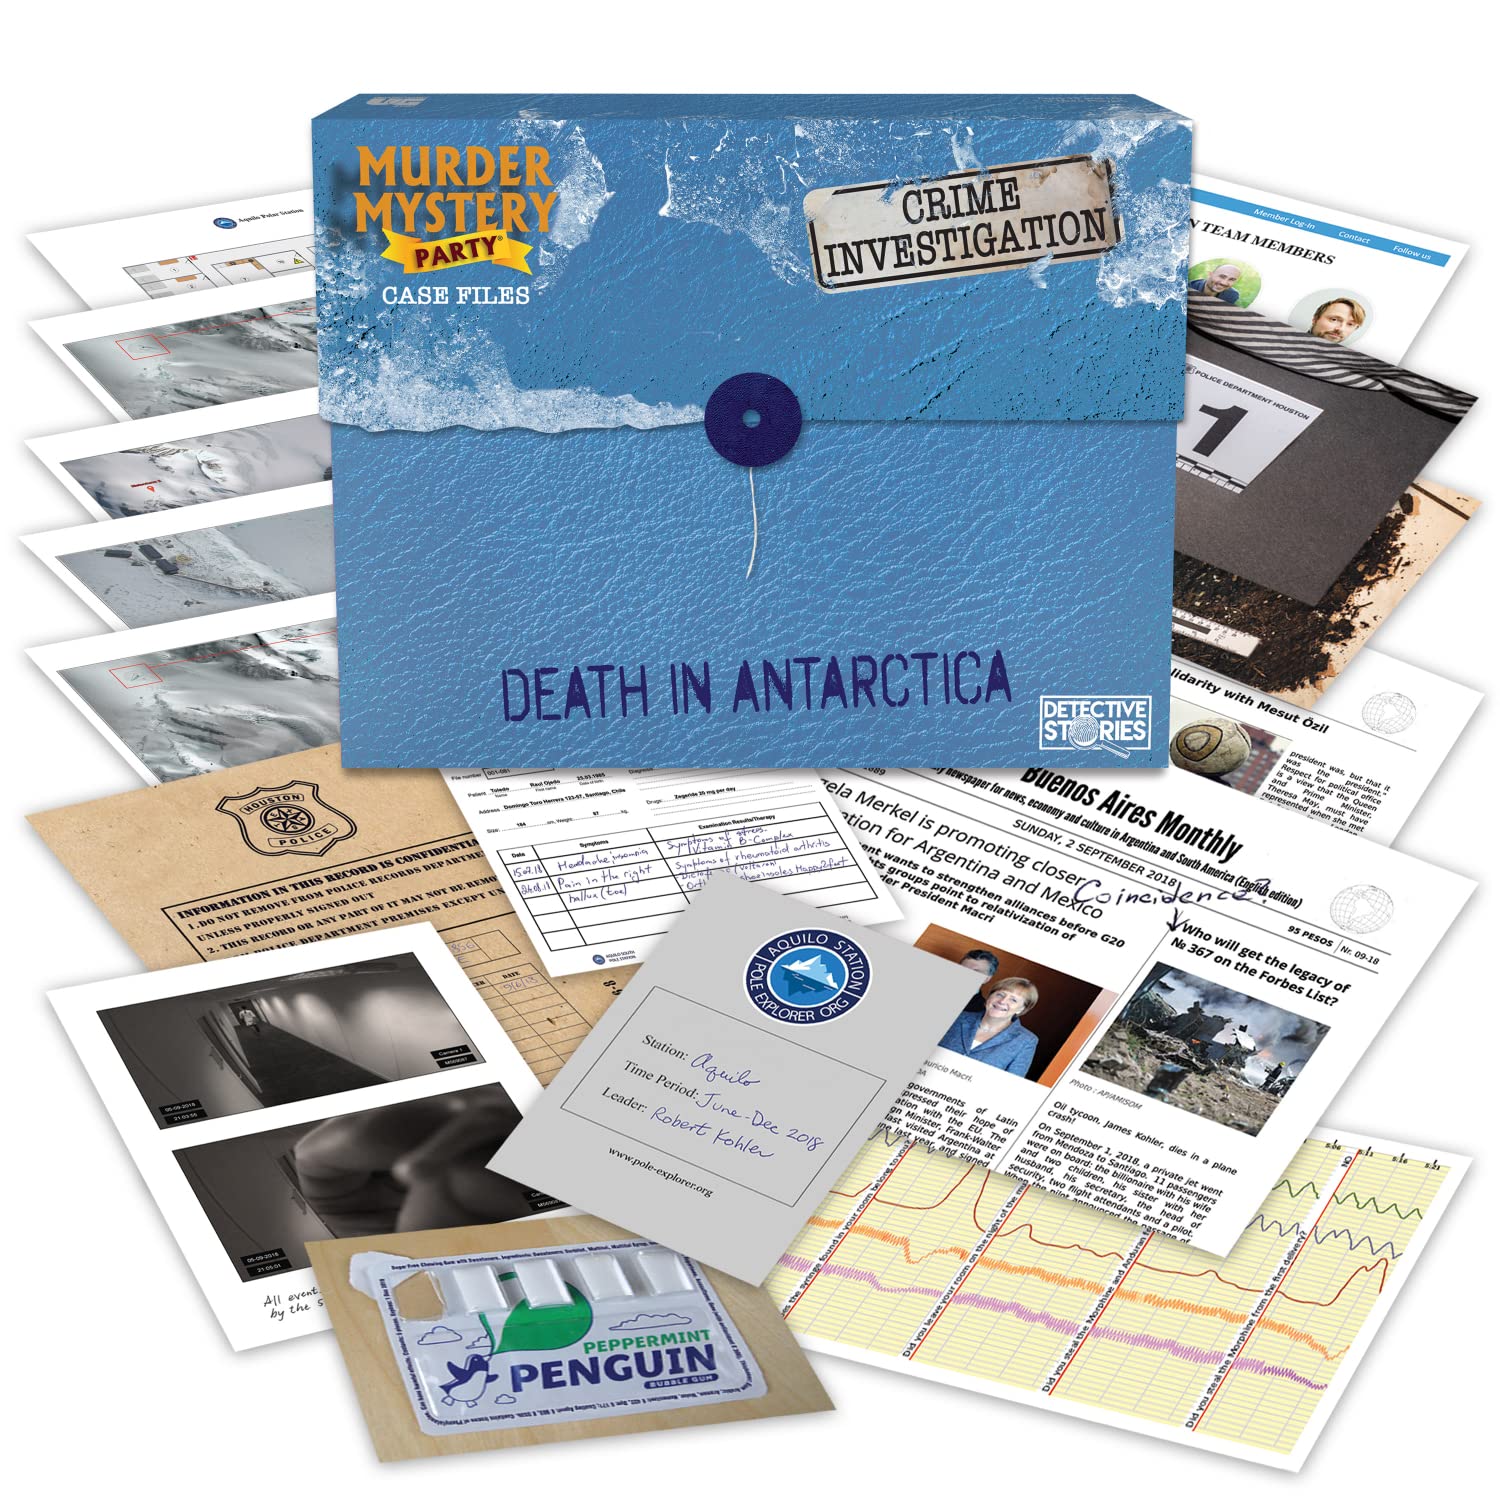 (New Aug) UG Murder Mystery Party Case Files: Death in Antarctica